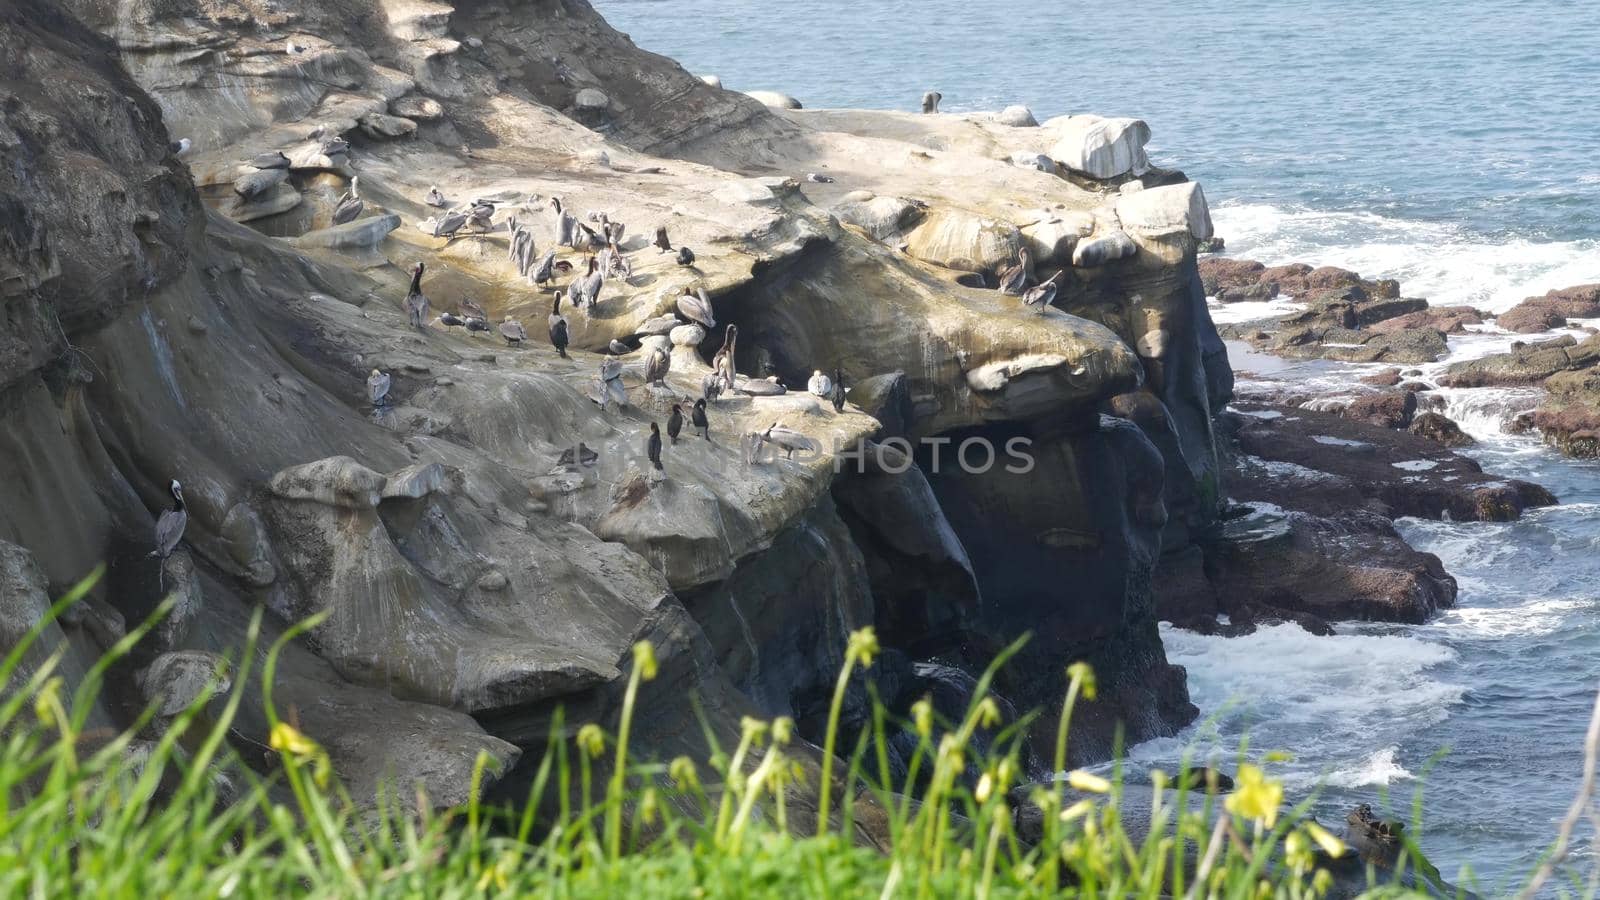 Brown pelicans with throat pouch and double-crested cormorants after fishing, rock in La Jolla Cove. Sea bird with large beak on cliff over pacific ocean in natural habitat, San Diego, California USA.